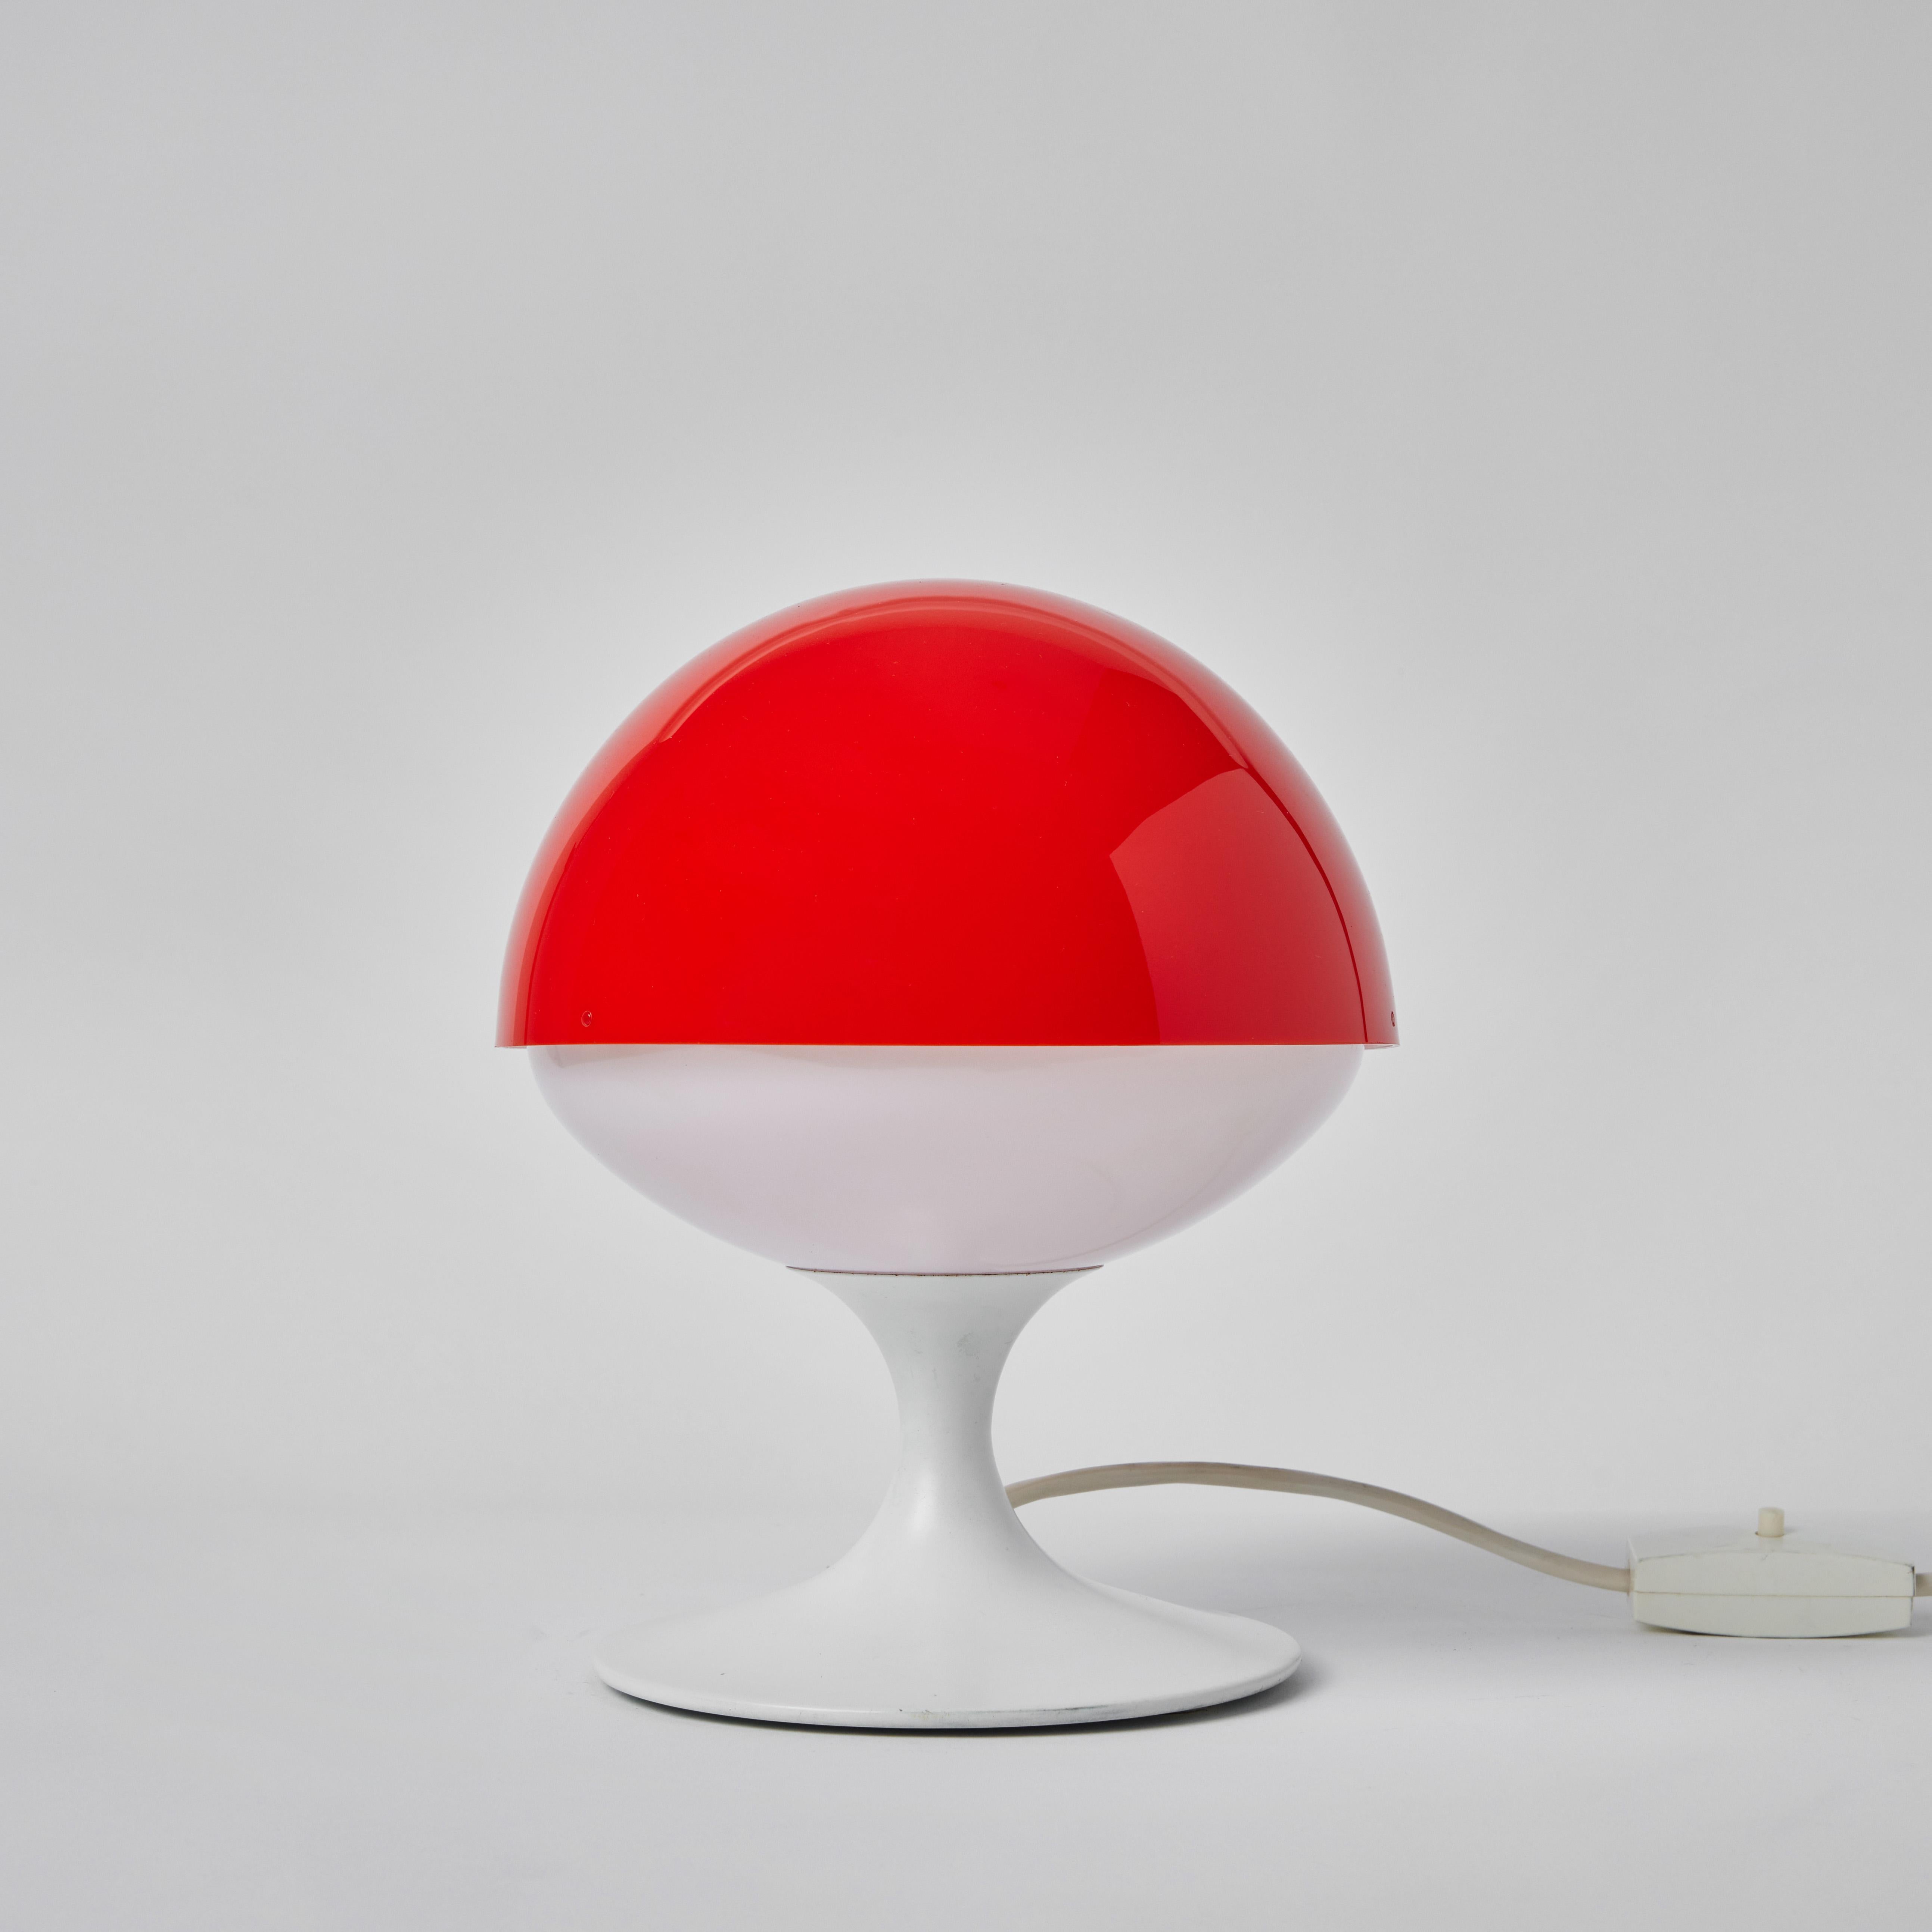 Pair of 1960s Max Bill Red & White Table Lamps for Temde Leuchten, Switzerland For Sale 6